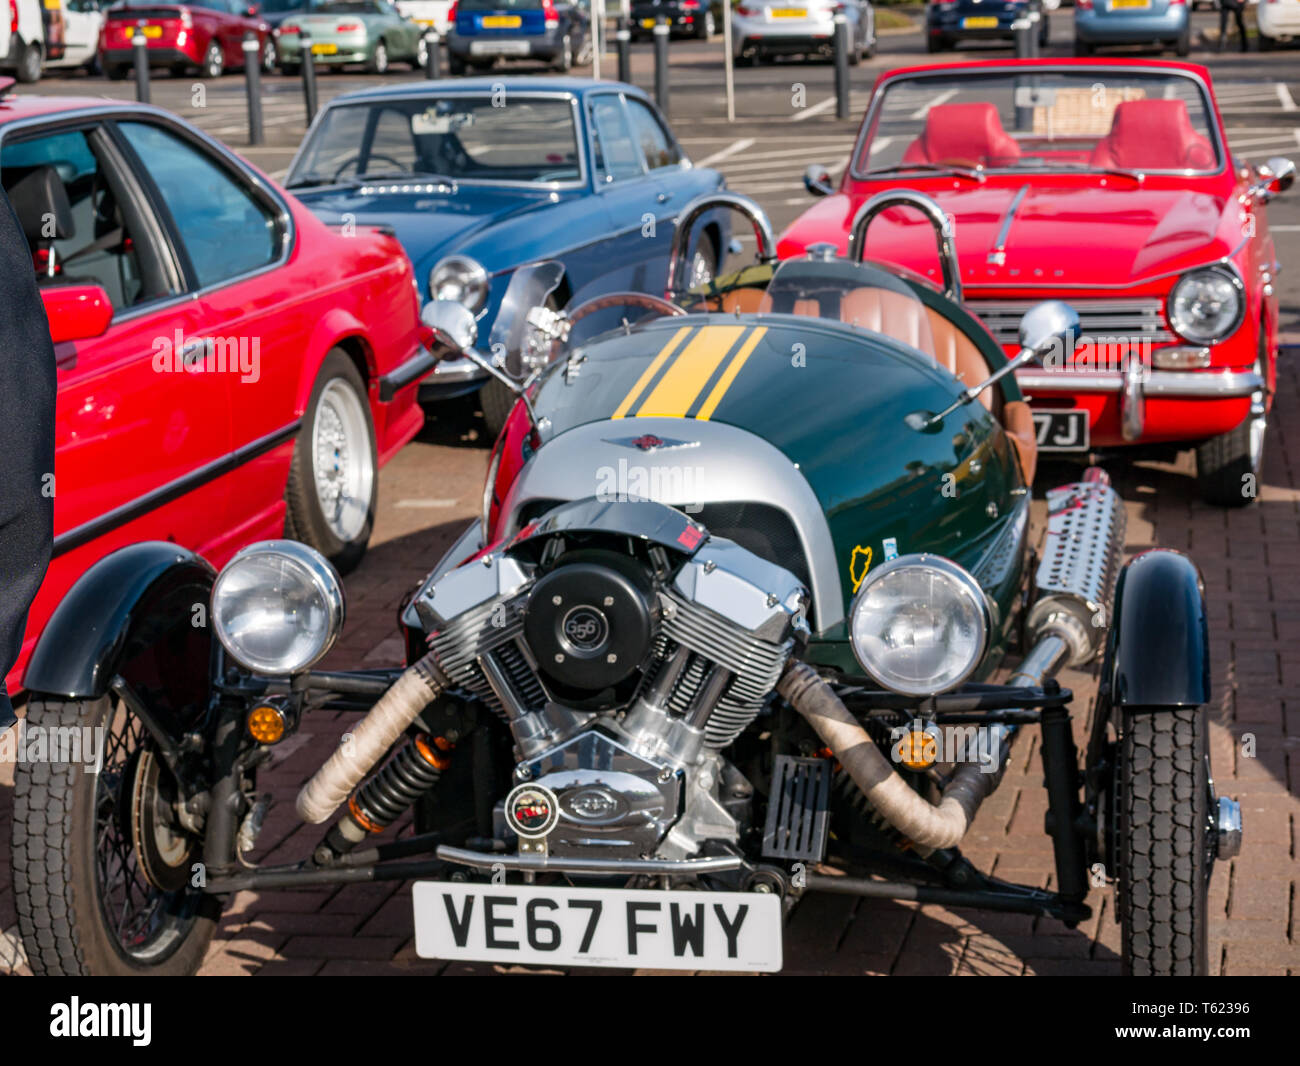 East Lothian, UK. 28 April 2019. Classic Car Tour: North Berwick Rotary Club holds its 3rd rally with 65 classic cars entered. The car rally route is from East Lothian and back through the Scottish Borders, raising money for local charities. The cars gather in North Berwick before setting off. A green 2017 Morgan three wheeler Stock Photo